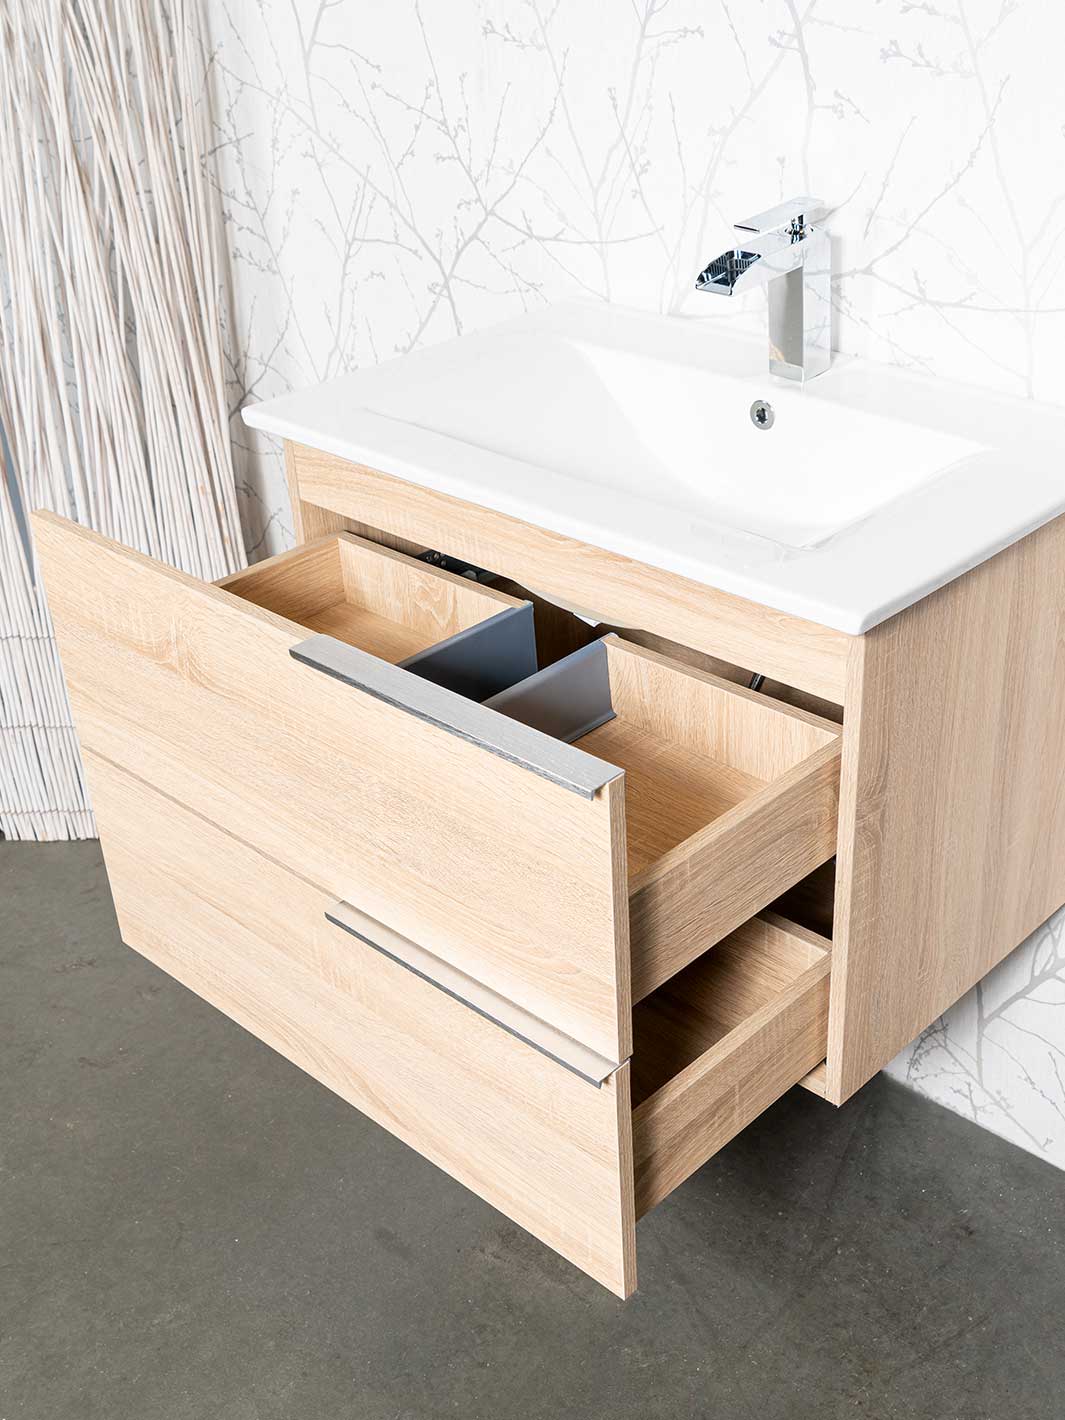 two drawers open on vanity